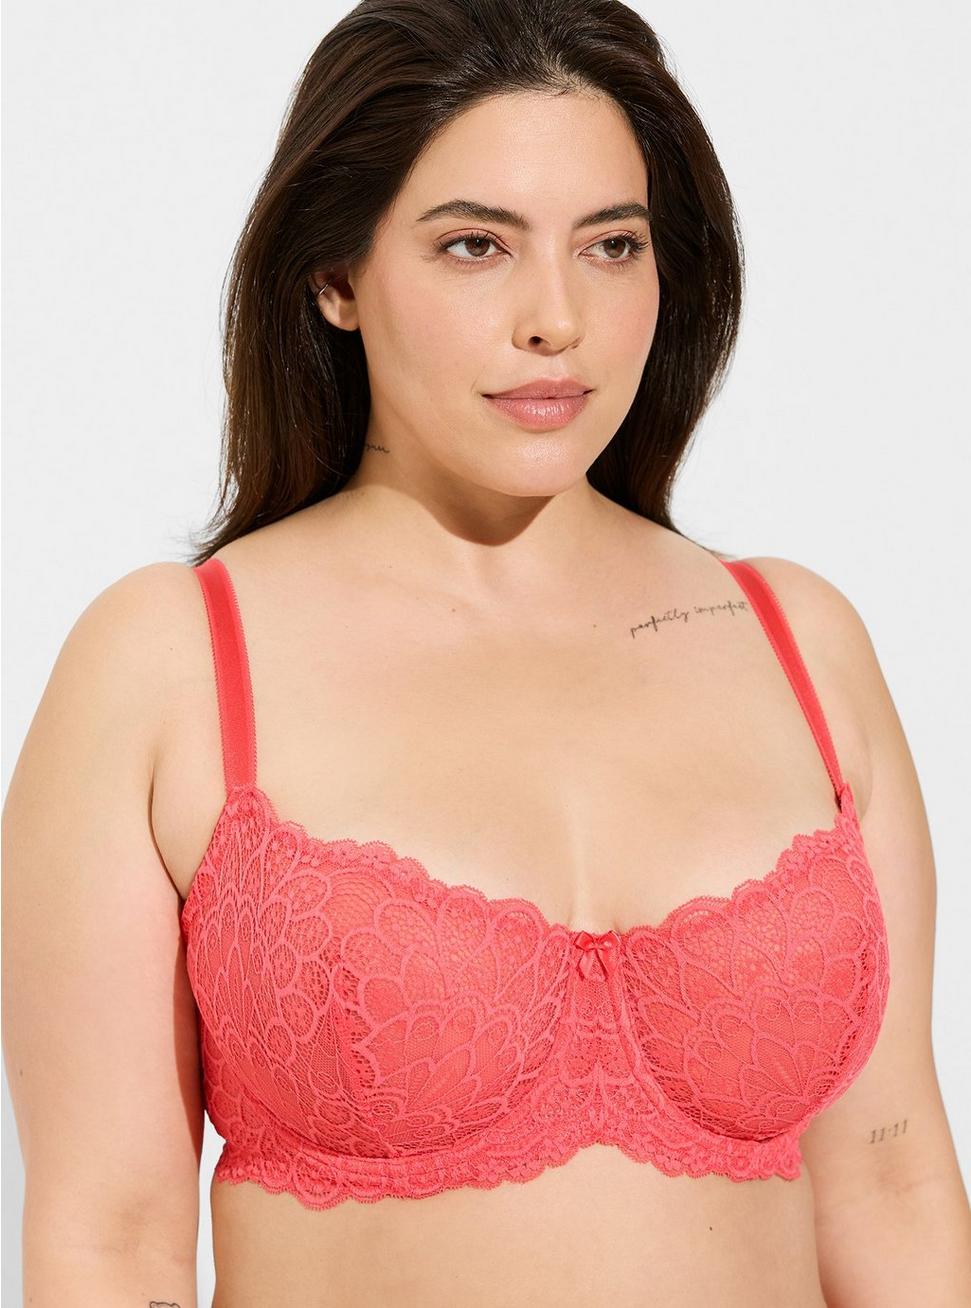 Balconette Unlined Peacock Lace Straight Back Bra, PARADISE PINK, hi-res